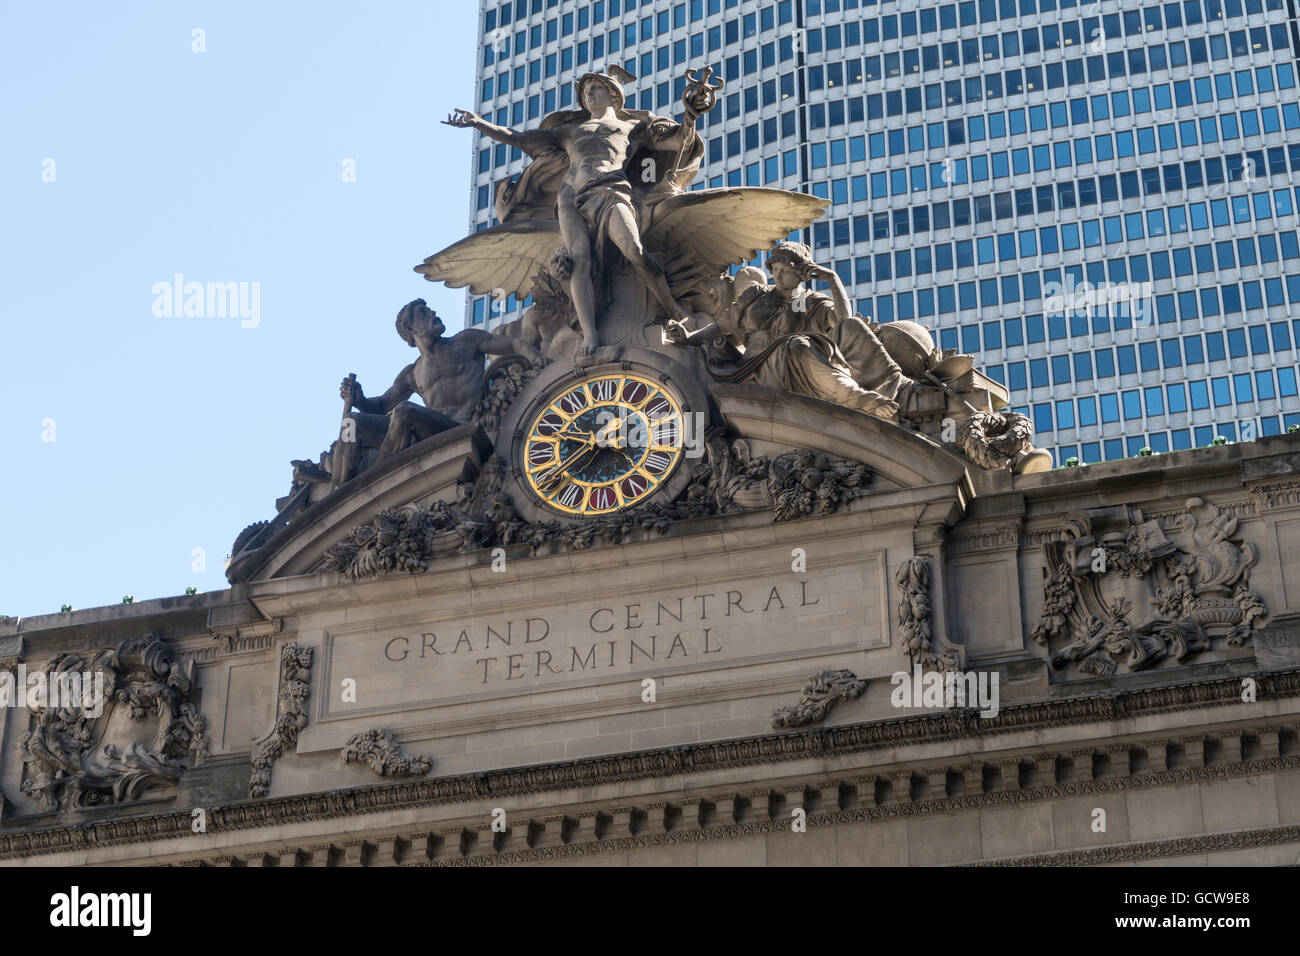 The facade of Grand Central Terminal features a transportation sculpture and a Tiffany glass clock, New York City, USA Stock Photo